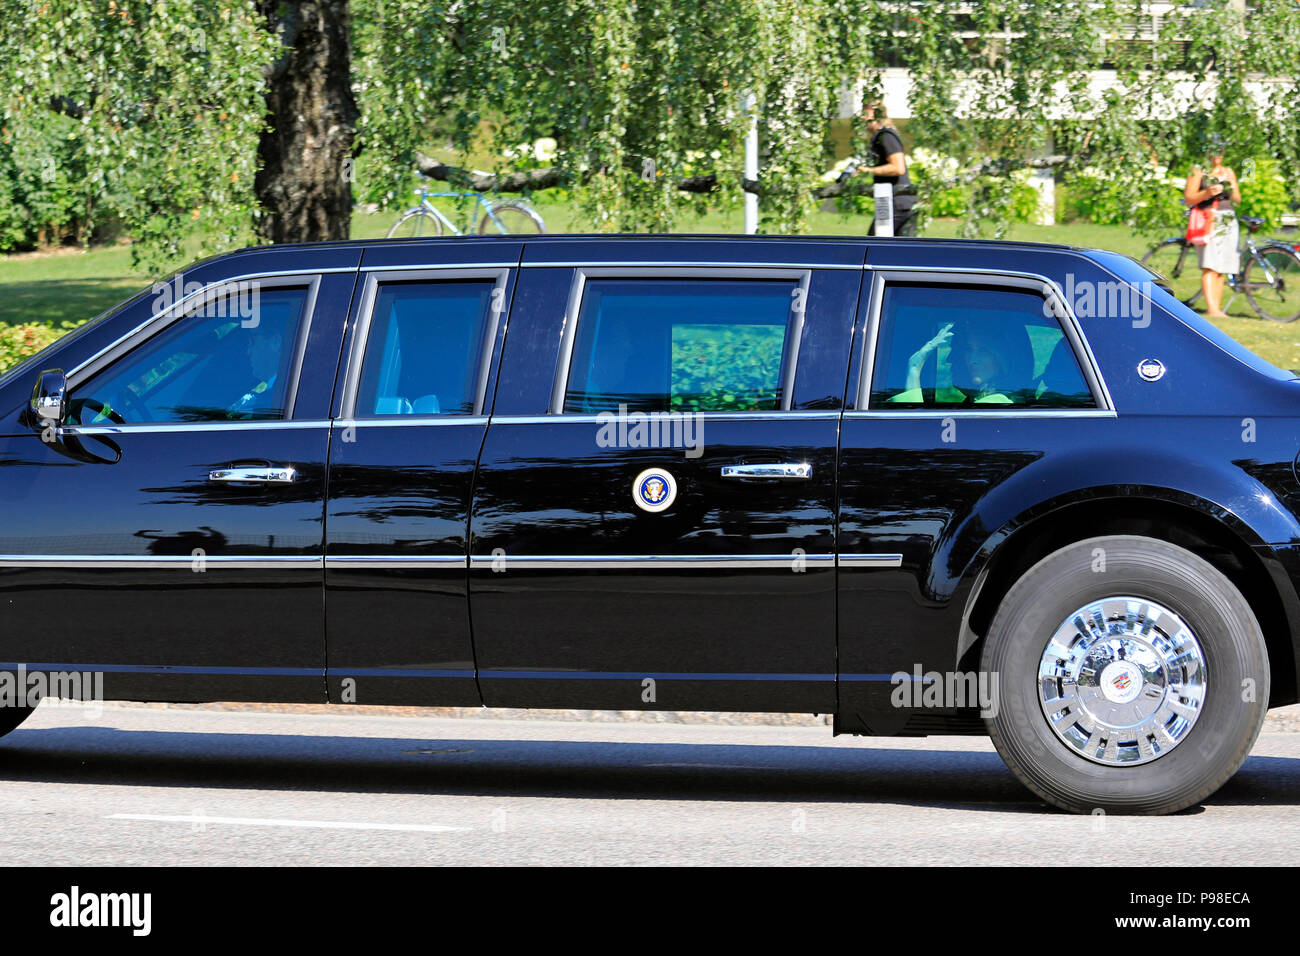 Helsinki, Finland. July 16, 2018. The motorcade of US President Donald Trump and First Lady Melania Trump passes along Ramsaynranta ahead of US and Russian Presidents' historic meeting. First Lady Melania Trump waves to the crowd; President Trump shows partly in profile. Credit: Taina Sohlman/Alamy Live News Stock Photo